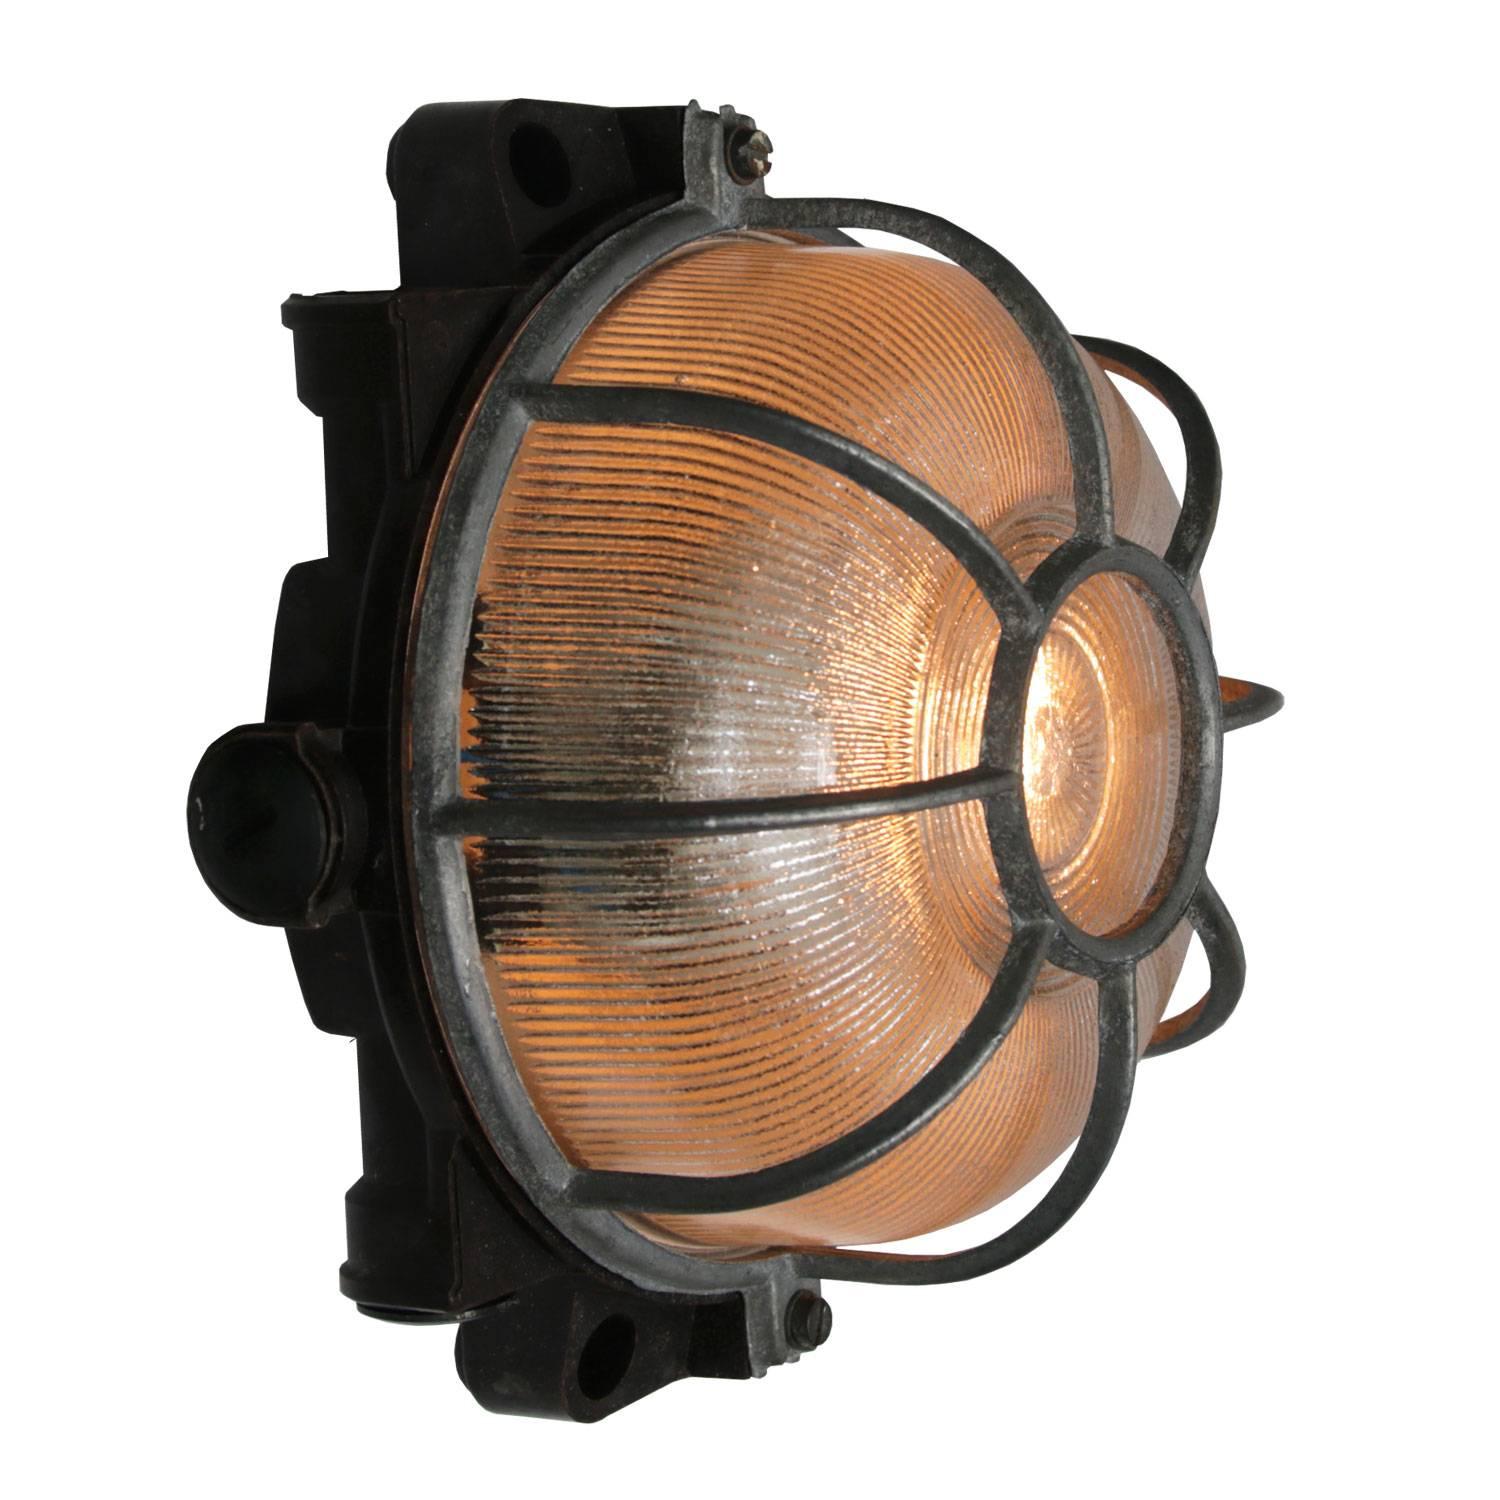 Industrial wall and ceiling scone. Bakelite back. Holophane striped glass.
Aluminium frame.

Weight 1.0 kg / 2.2 lb

Priced individual item. All lamps have been made suitable by international standards for incandescent light bulbs, energy-efficient